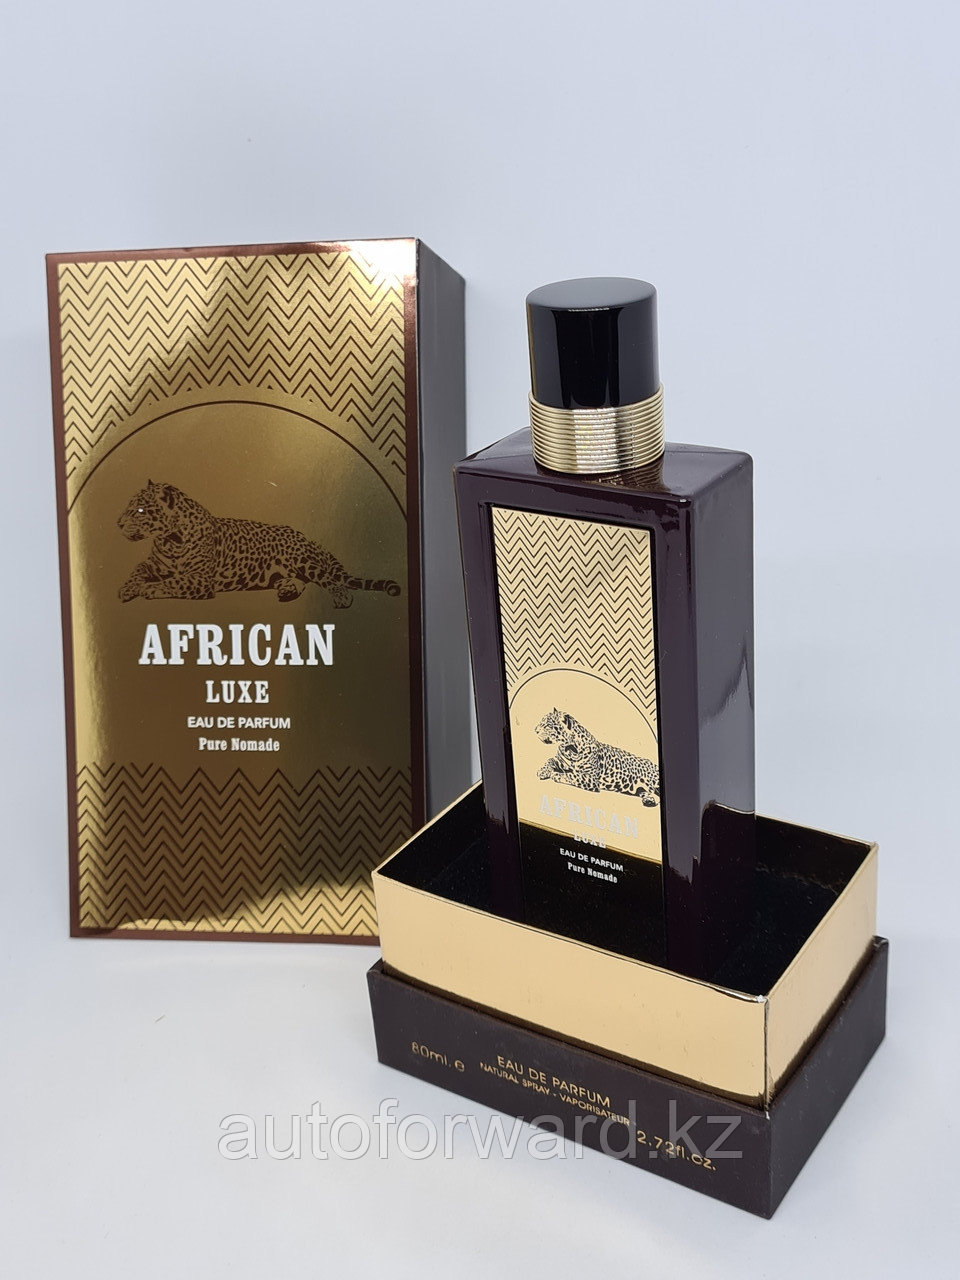 ОАЭ Парфюм African Luxe (African Leather Memo Paris),100 мл